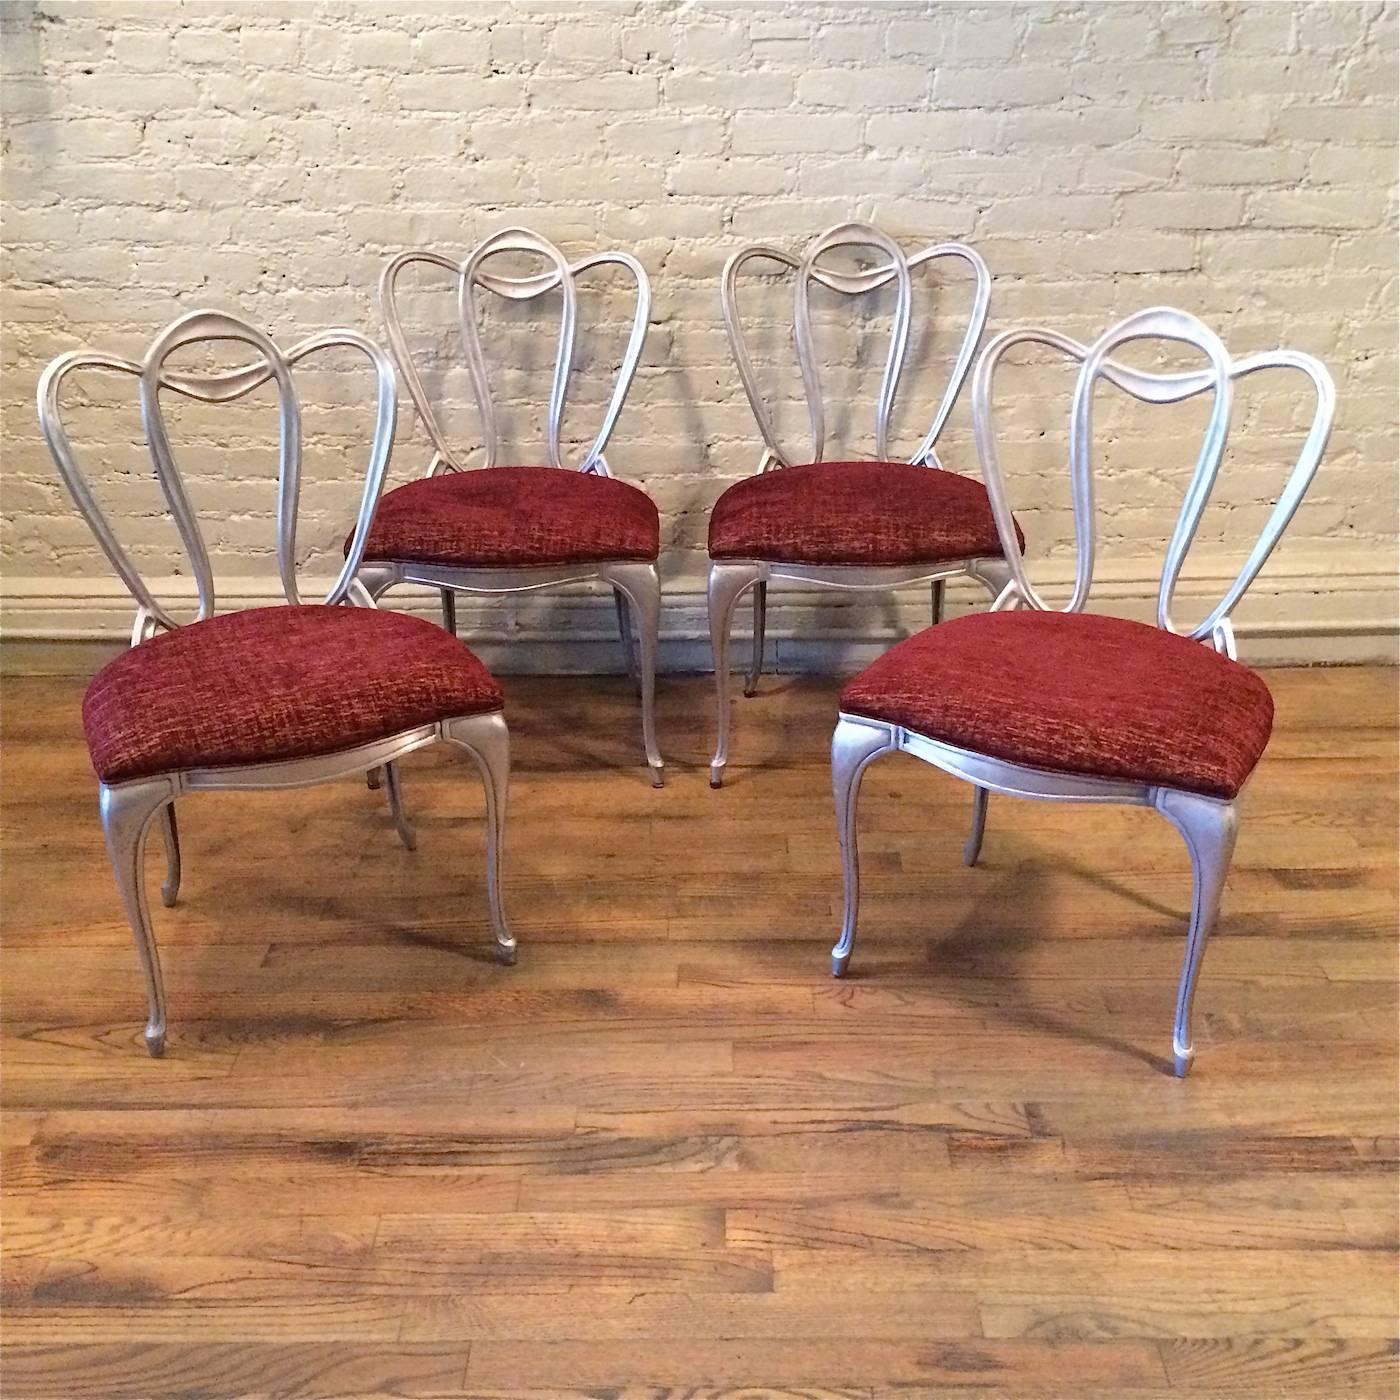 Set of four, Hollywood Regency, Art Nouveau, chairs with organic, vine motif, cast aluminum frames are newly upholstered in a rich, contrasting, burgundy, gold velvet. The Vitrolite table shown is listed separately.